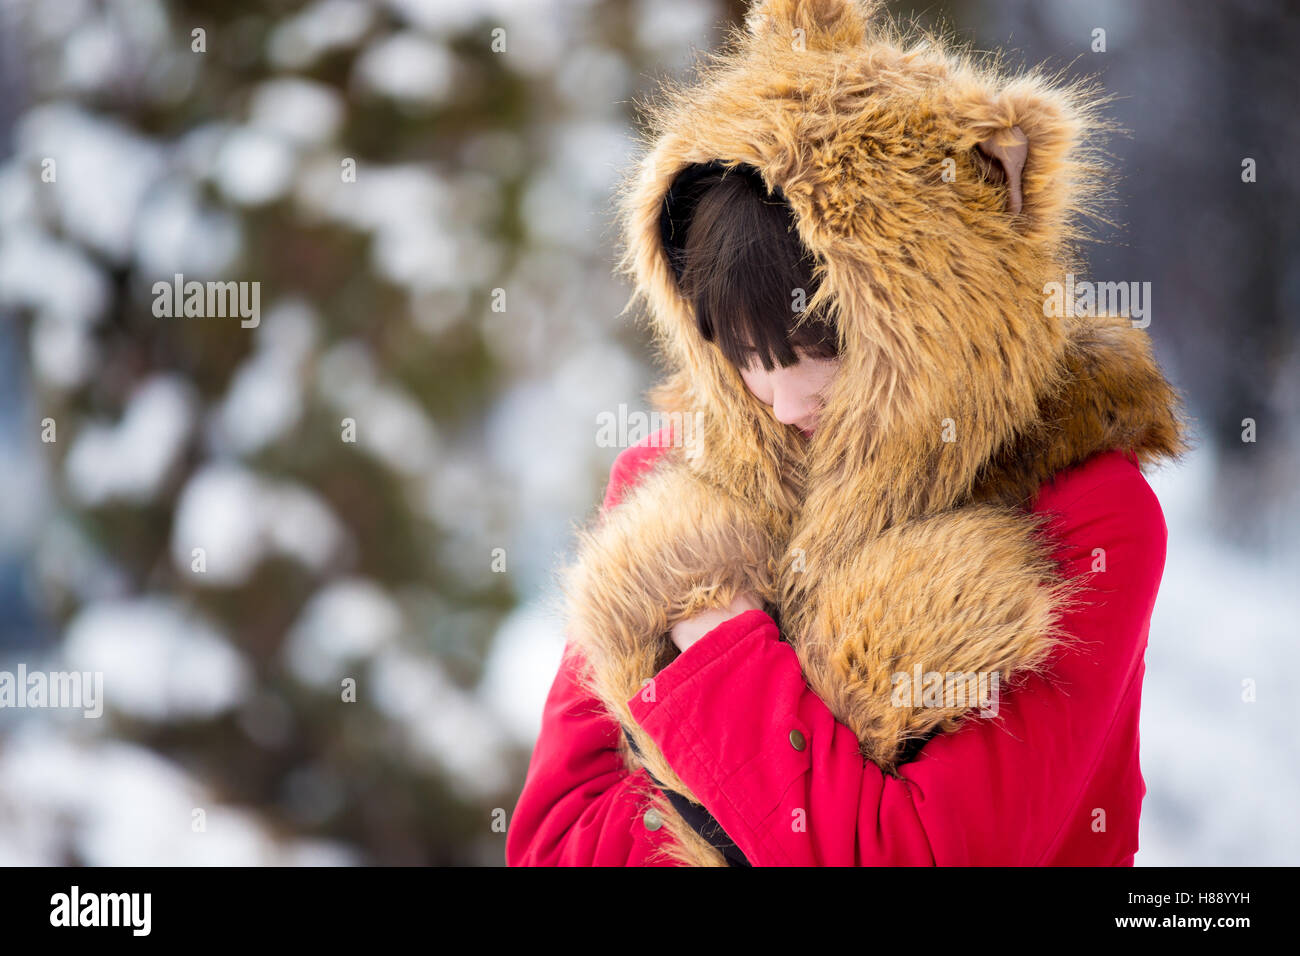 Female feeling cold outdoors in wintertime Stock Photo